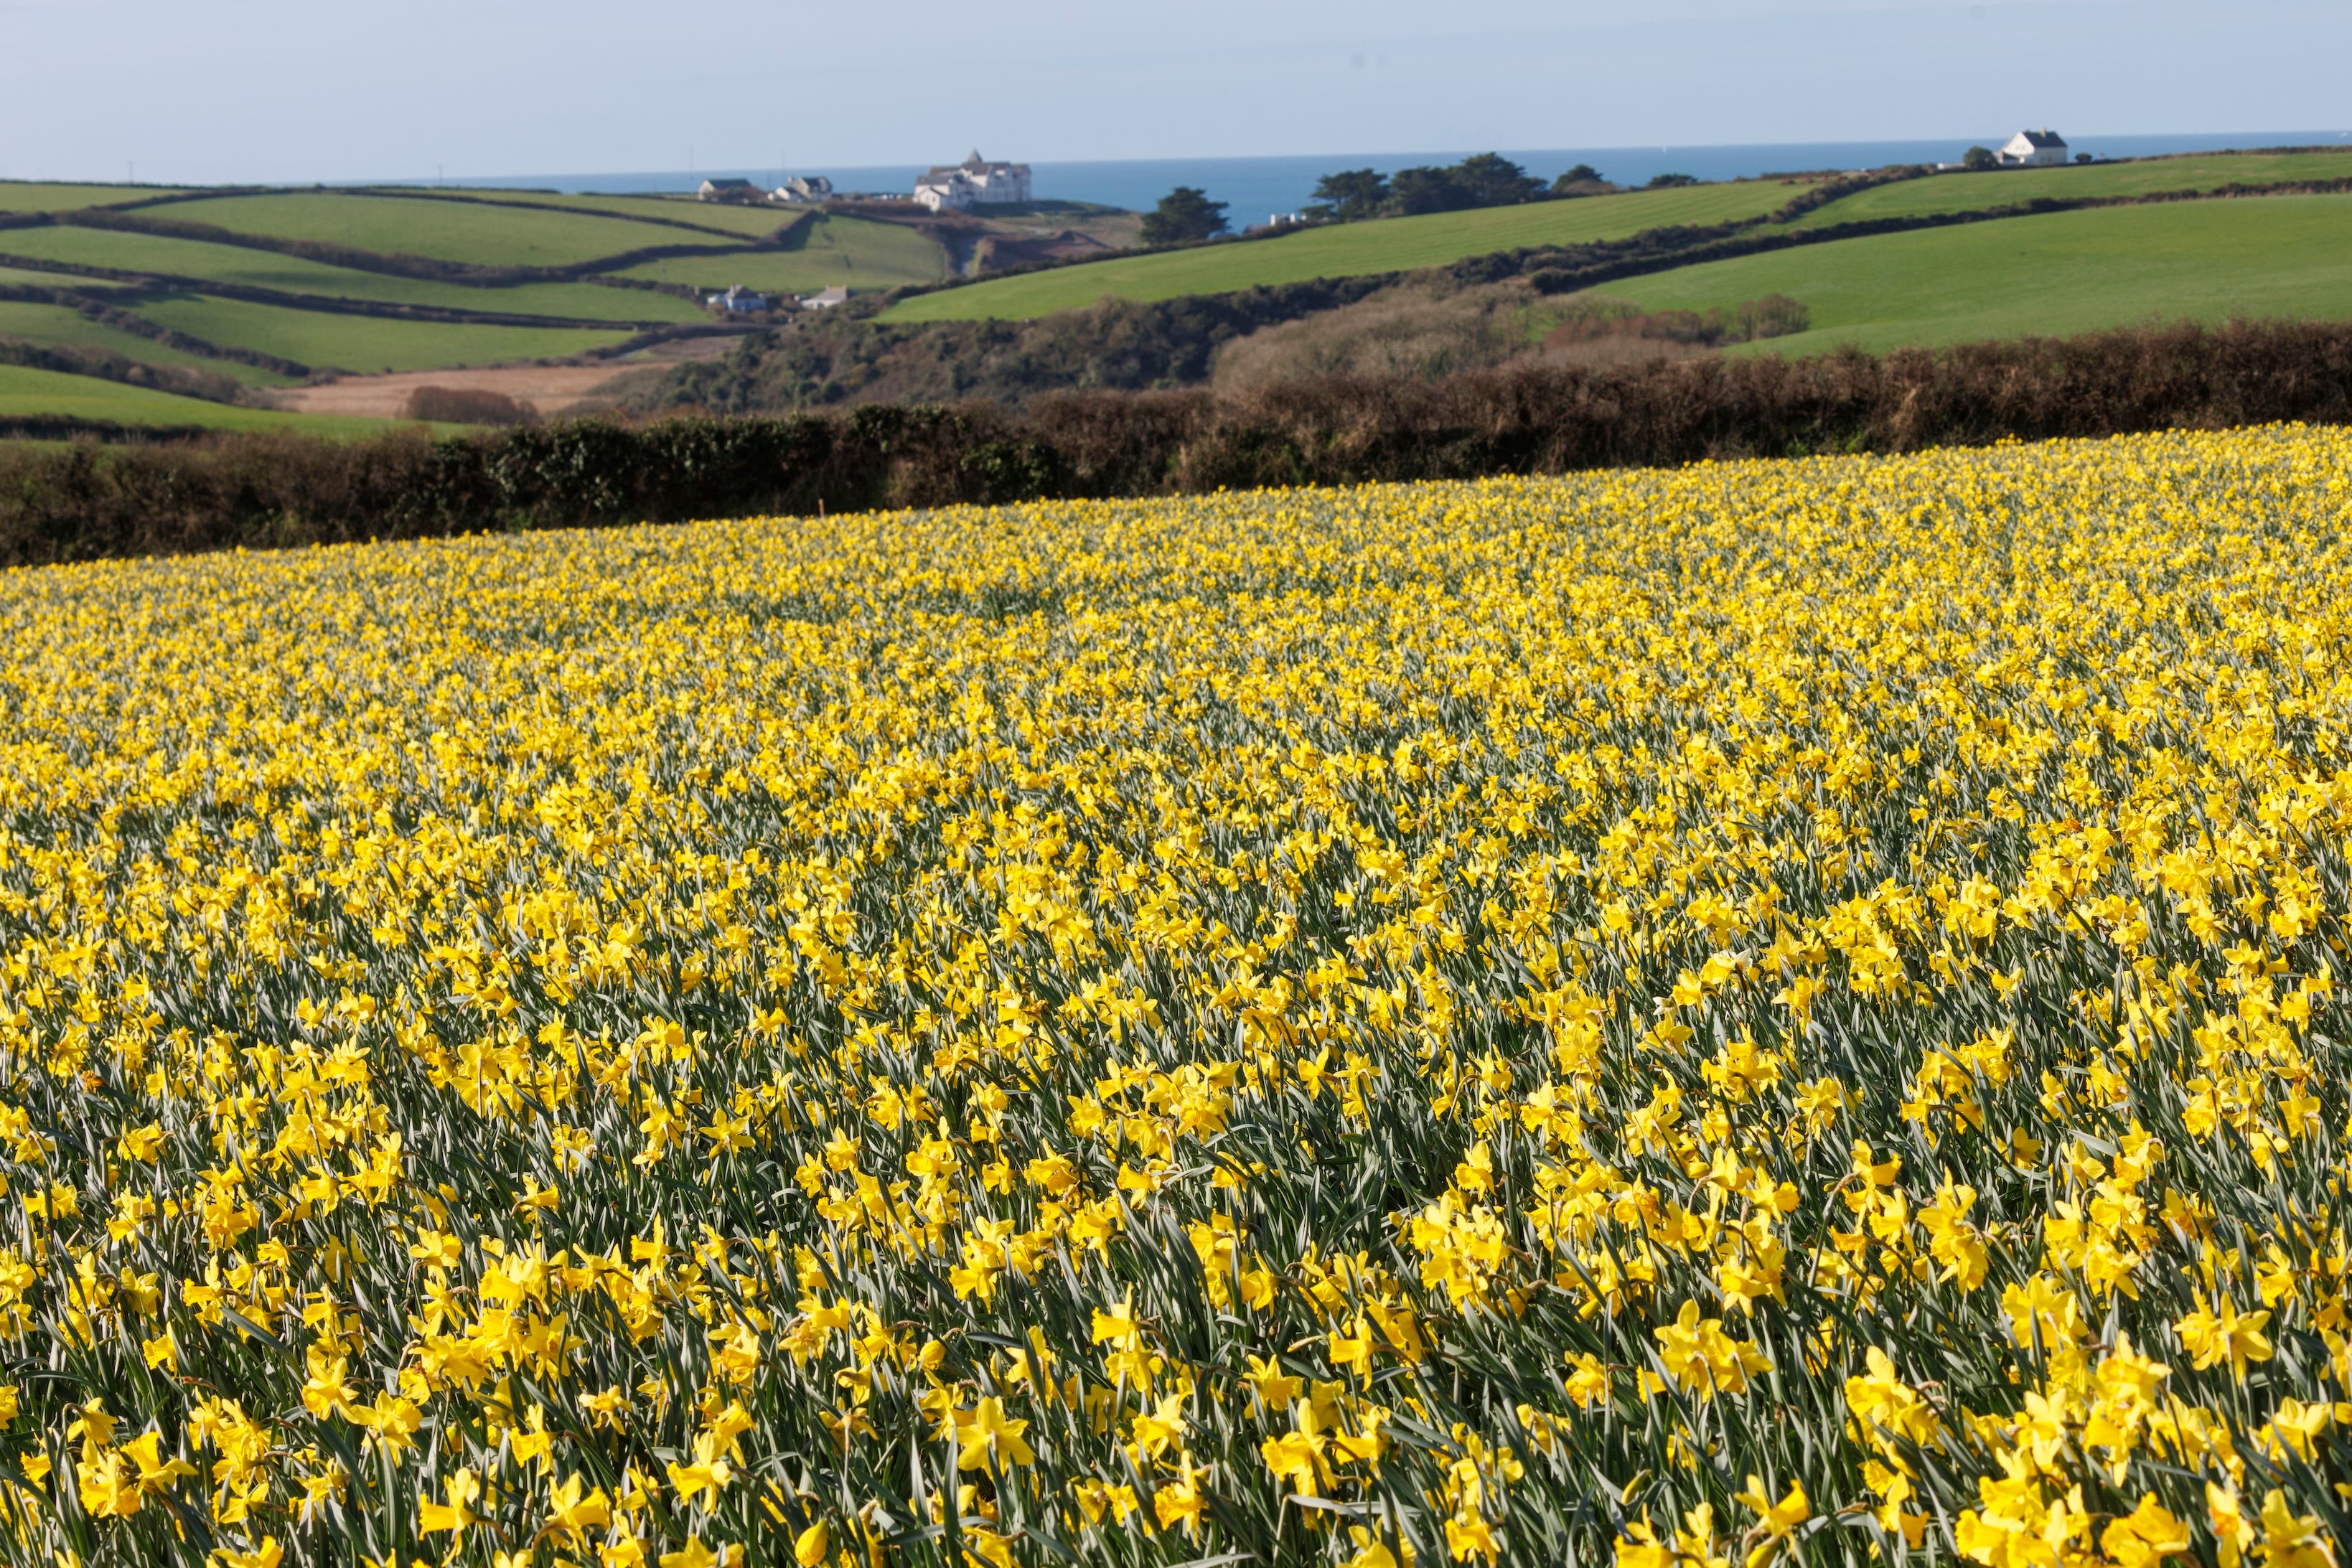 Daffodils have been grown on the farm for 20 years (Paul Box/PA)